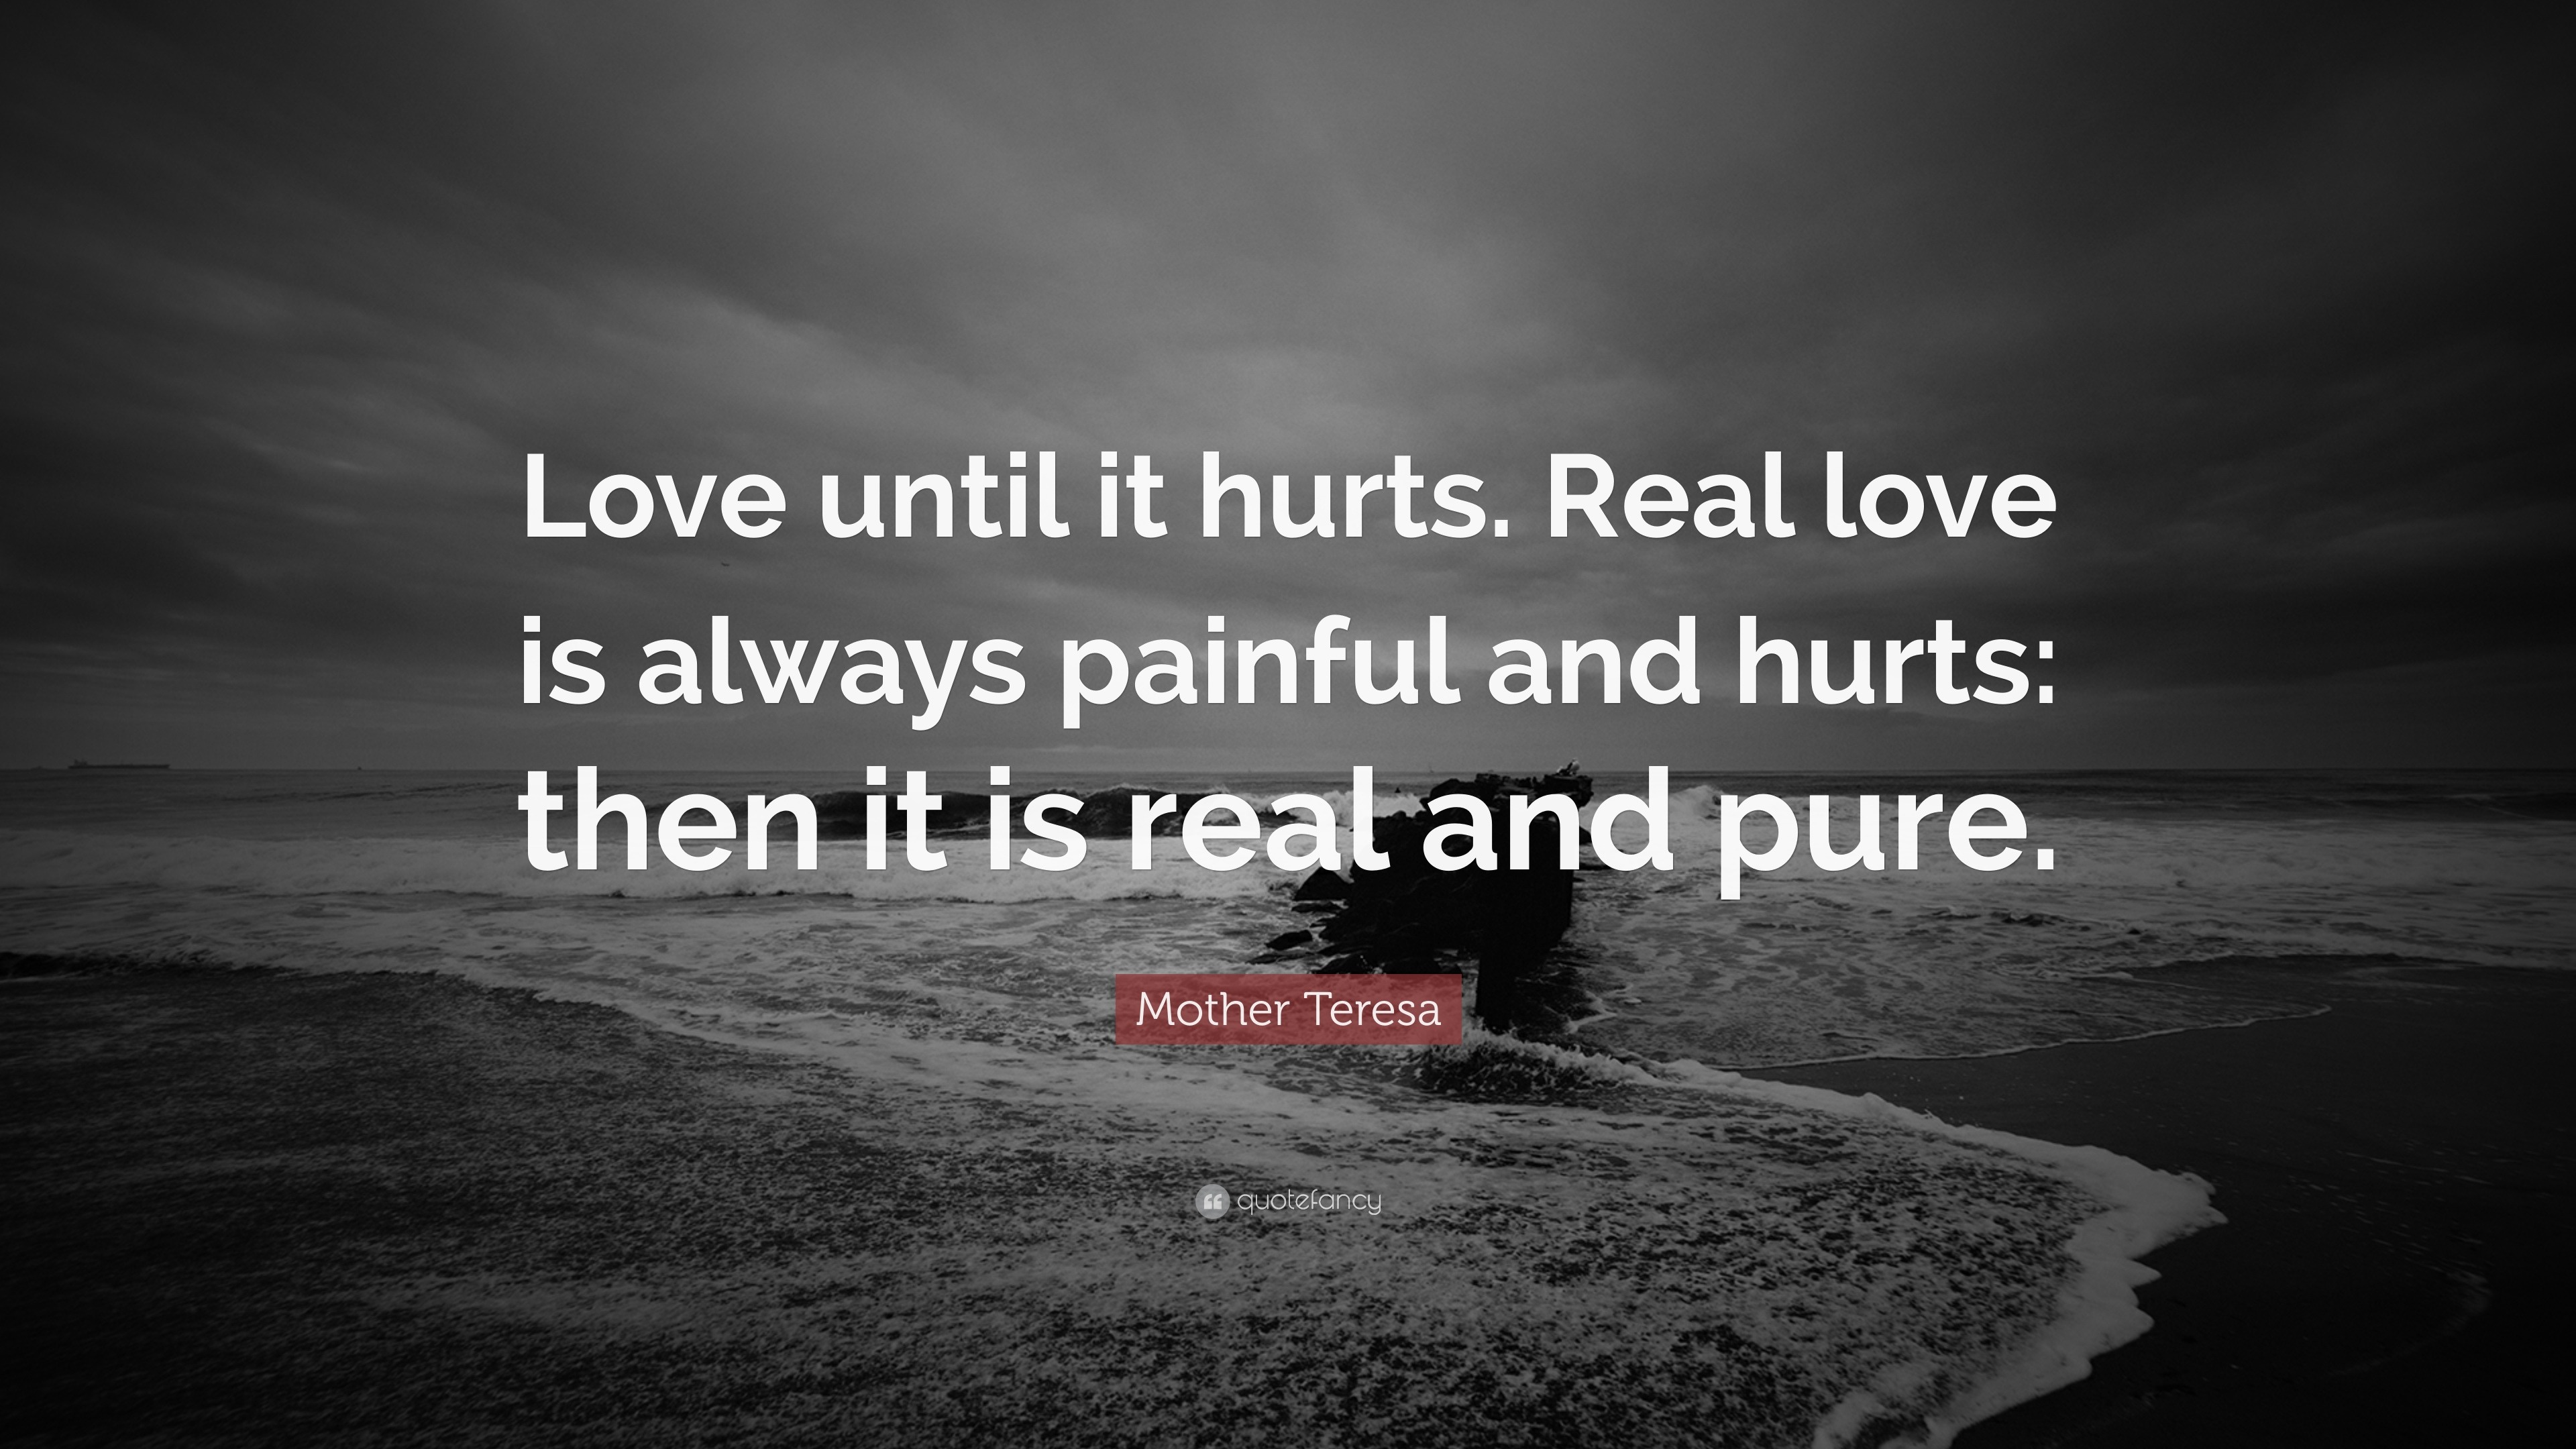 Quotes when Love Hurts | Thousands of Inspiration Quotes About Love and